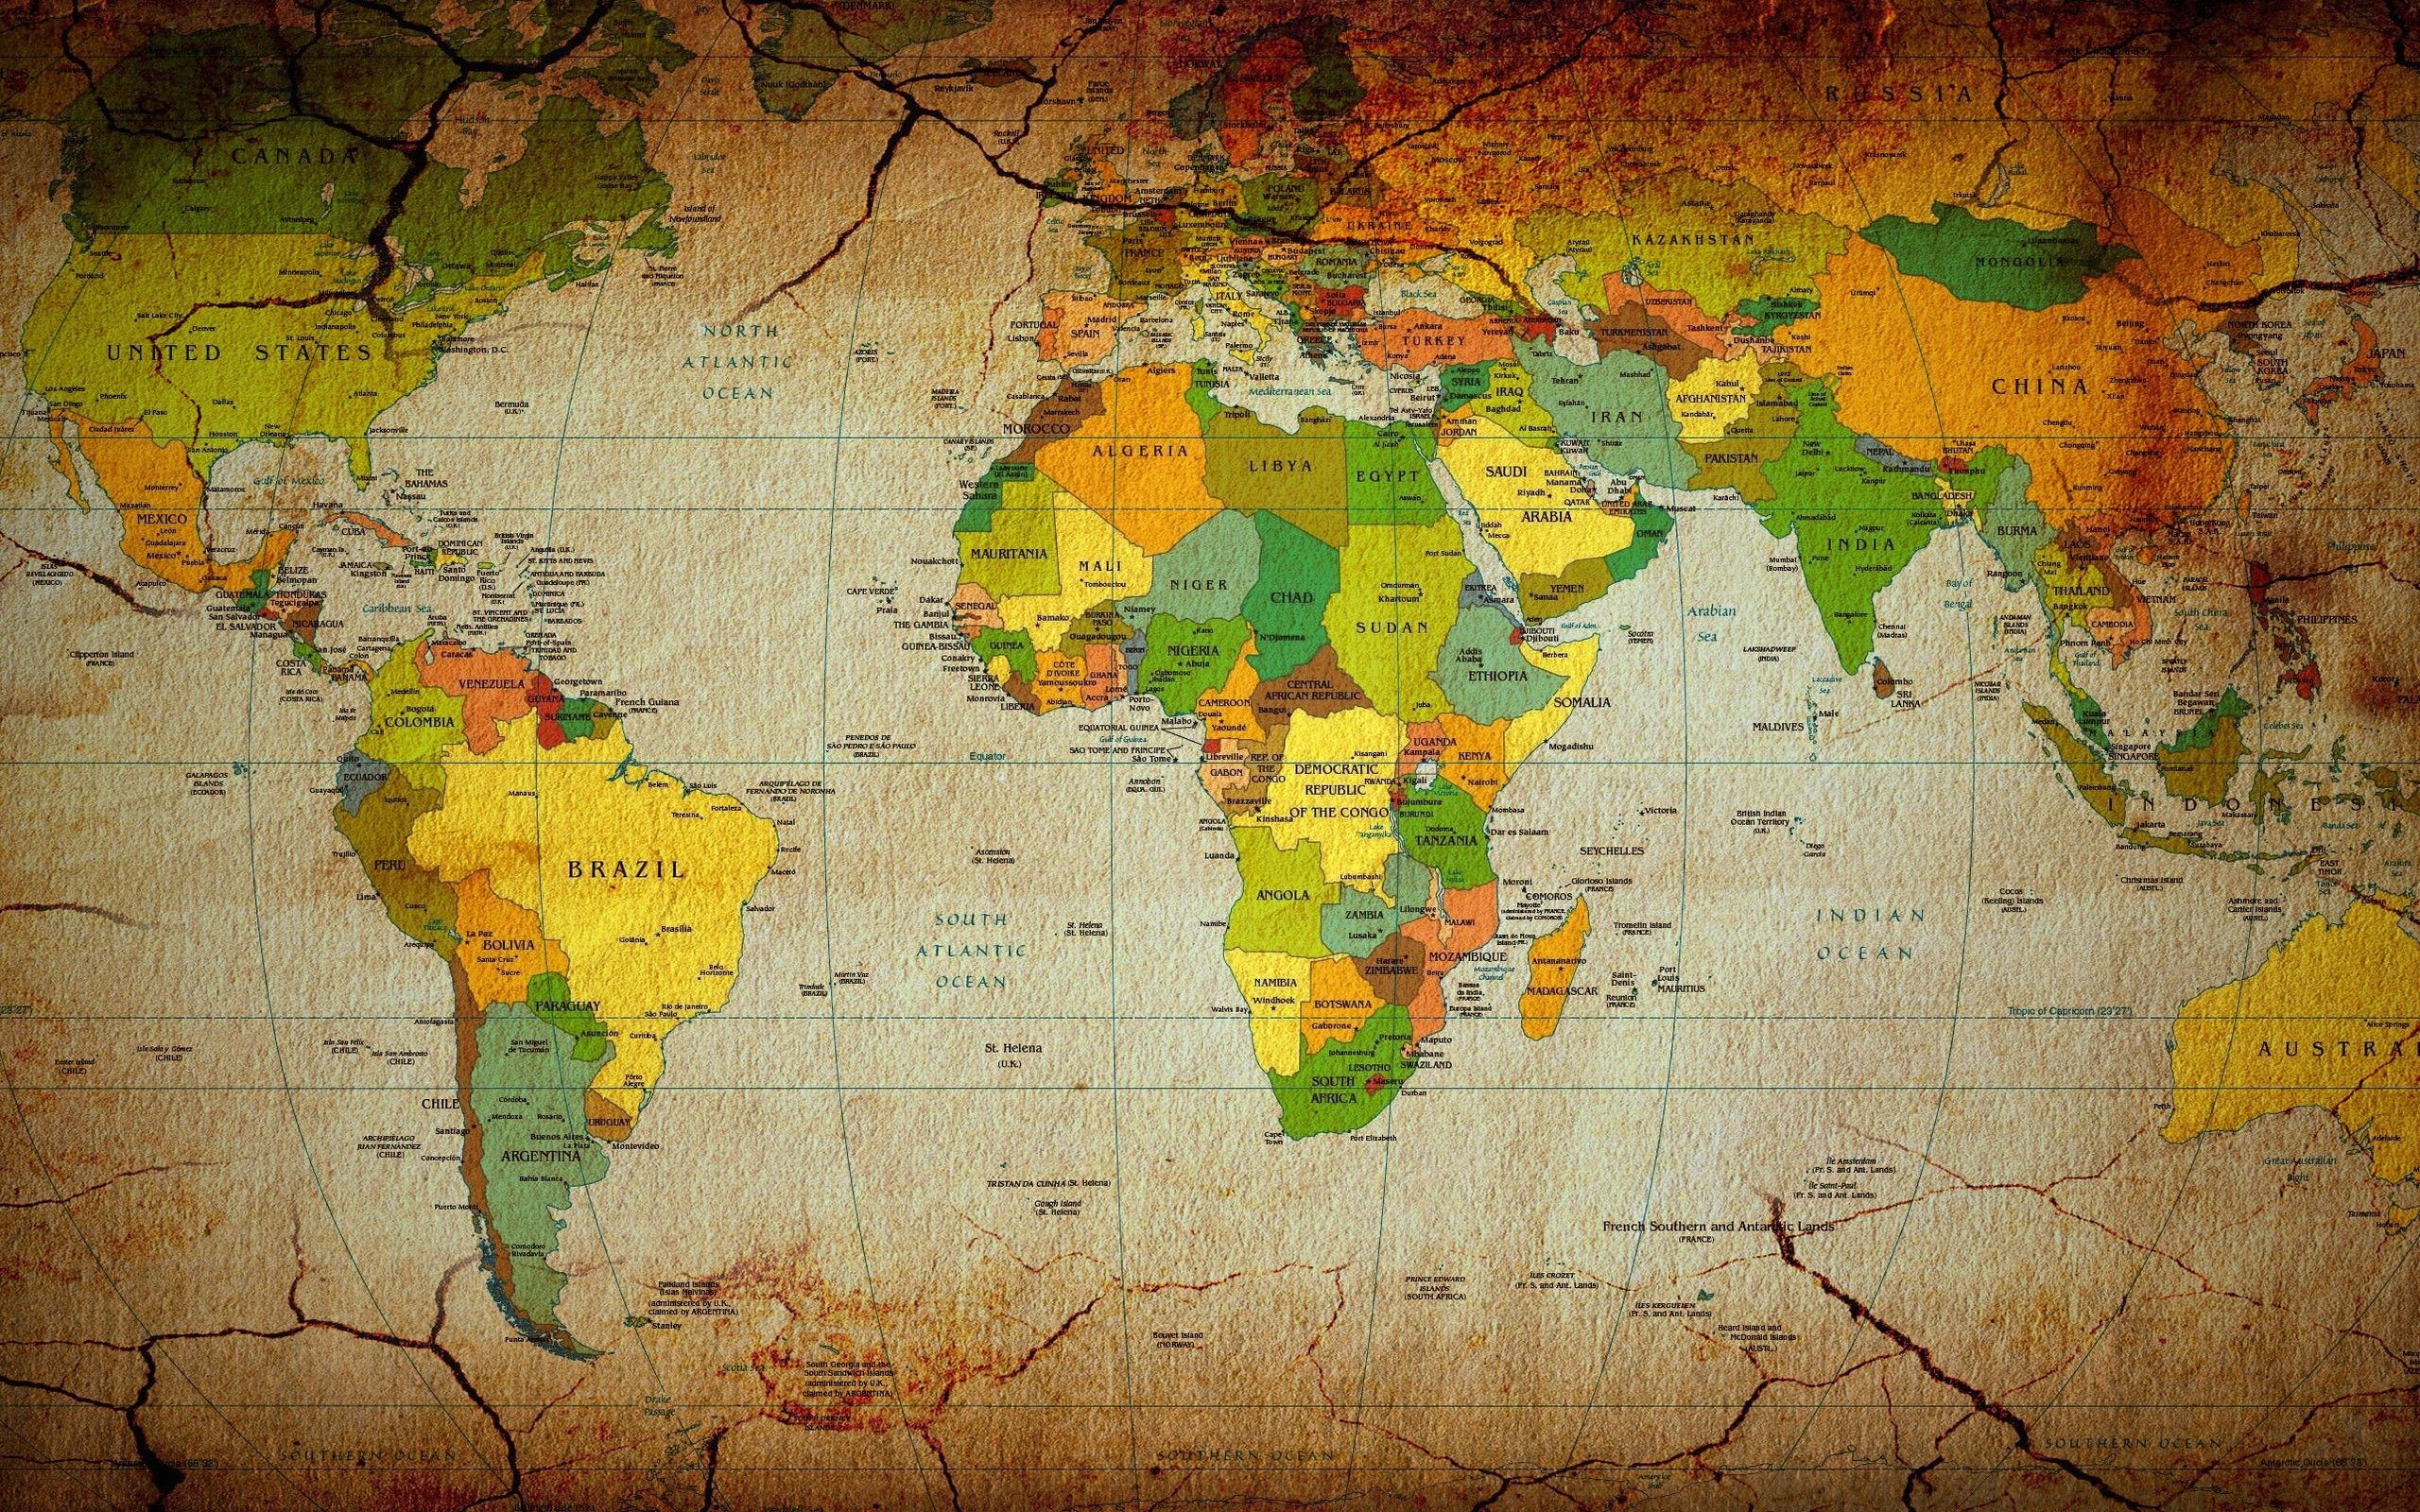 Geography travels, Map wallpapers, Top free backgrounds, Explore the world, 2560x1600 HD Desktop